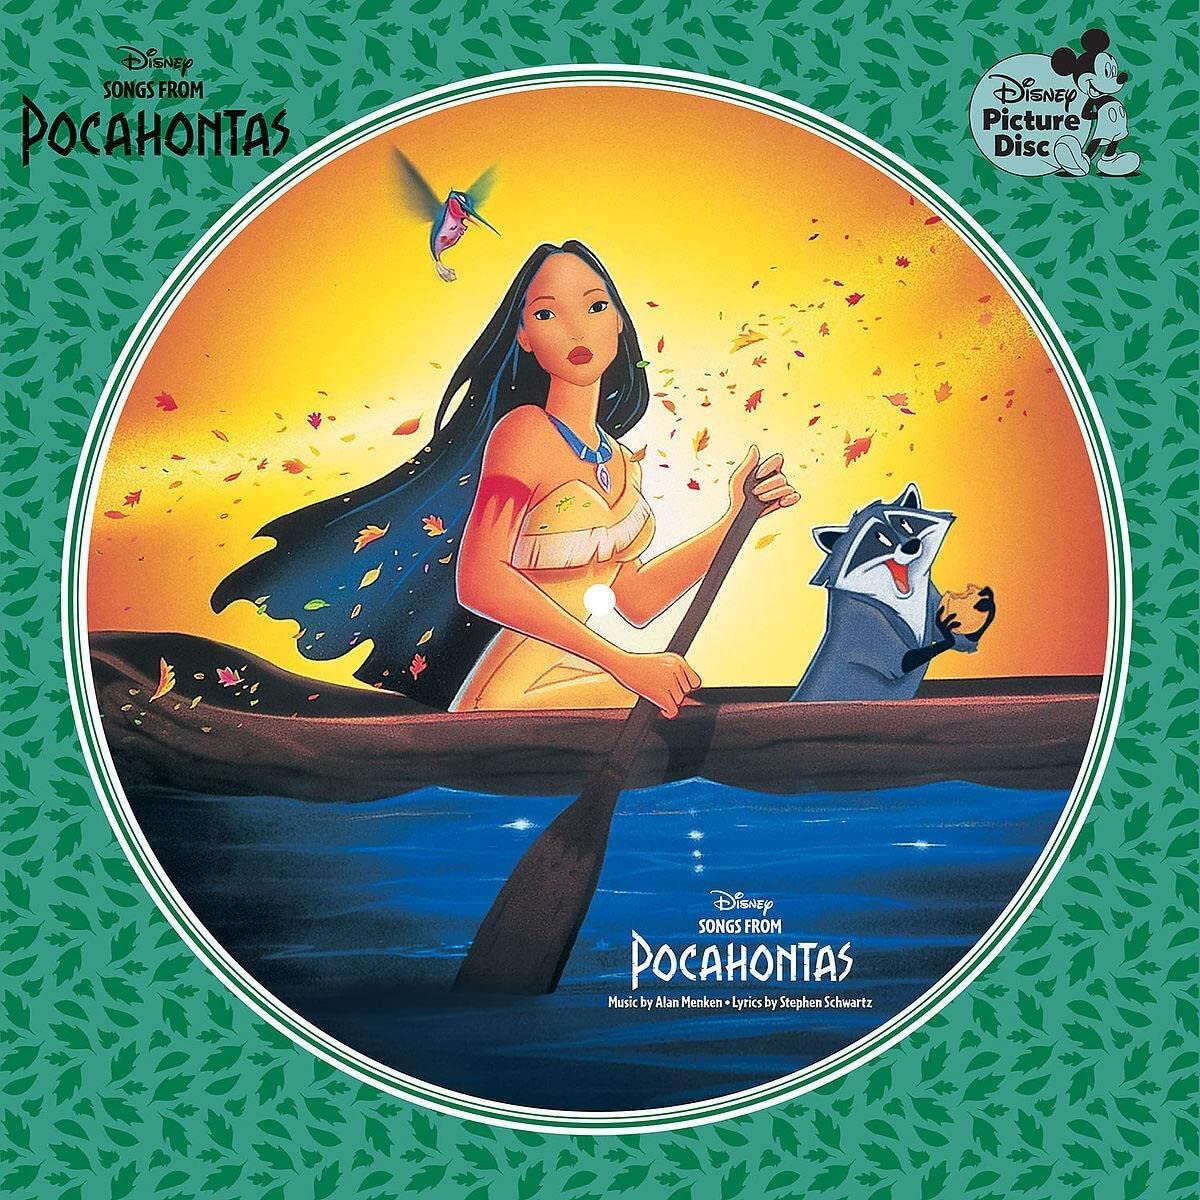 Songs From Pocahontas (Picture Disc) (Vinyl) on MovieShack